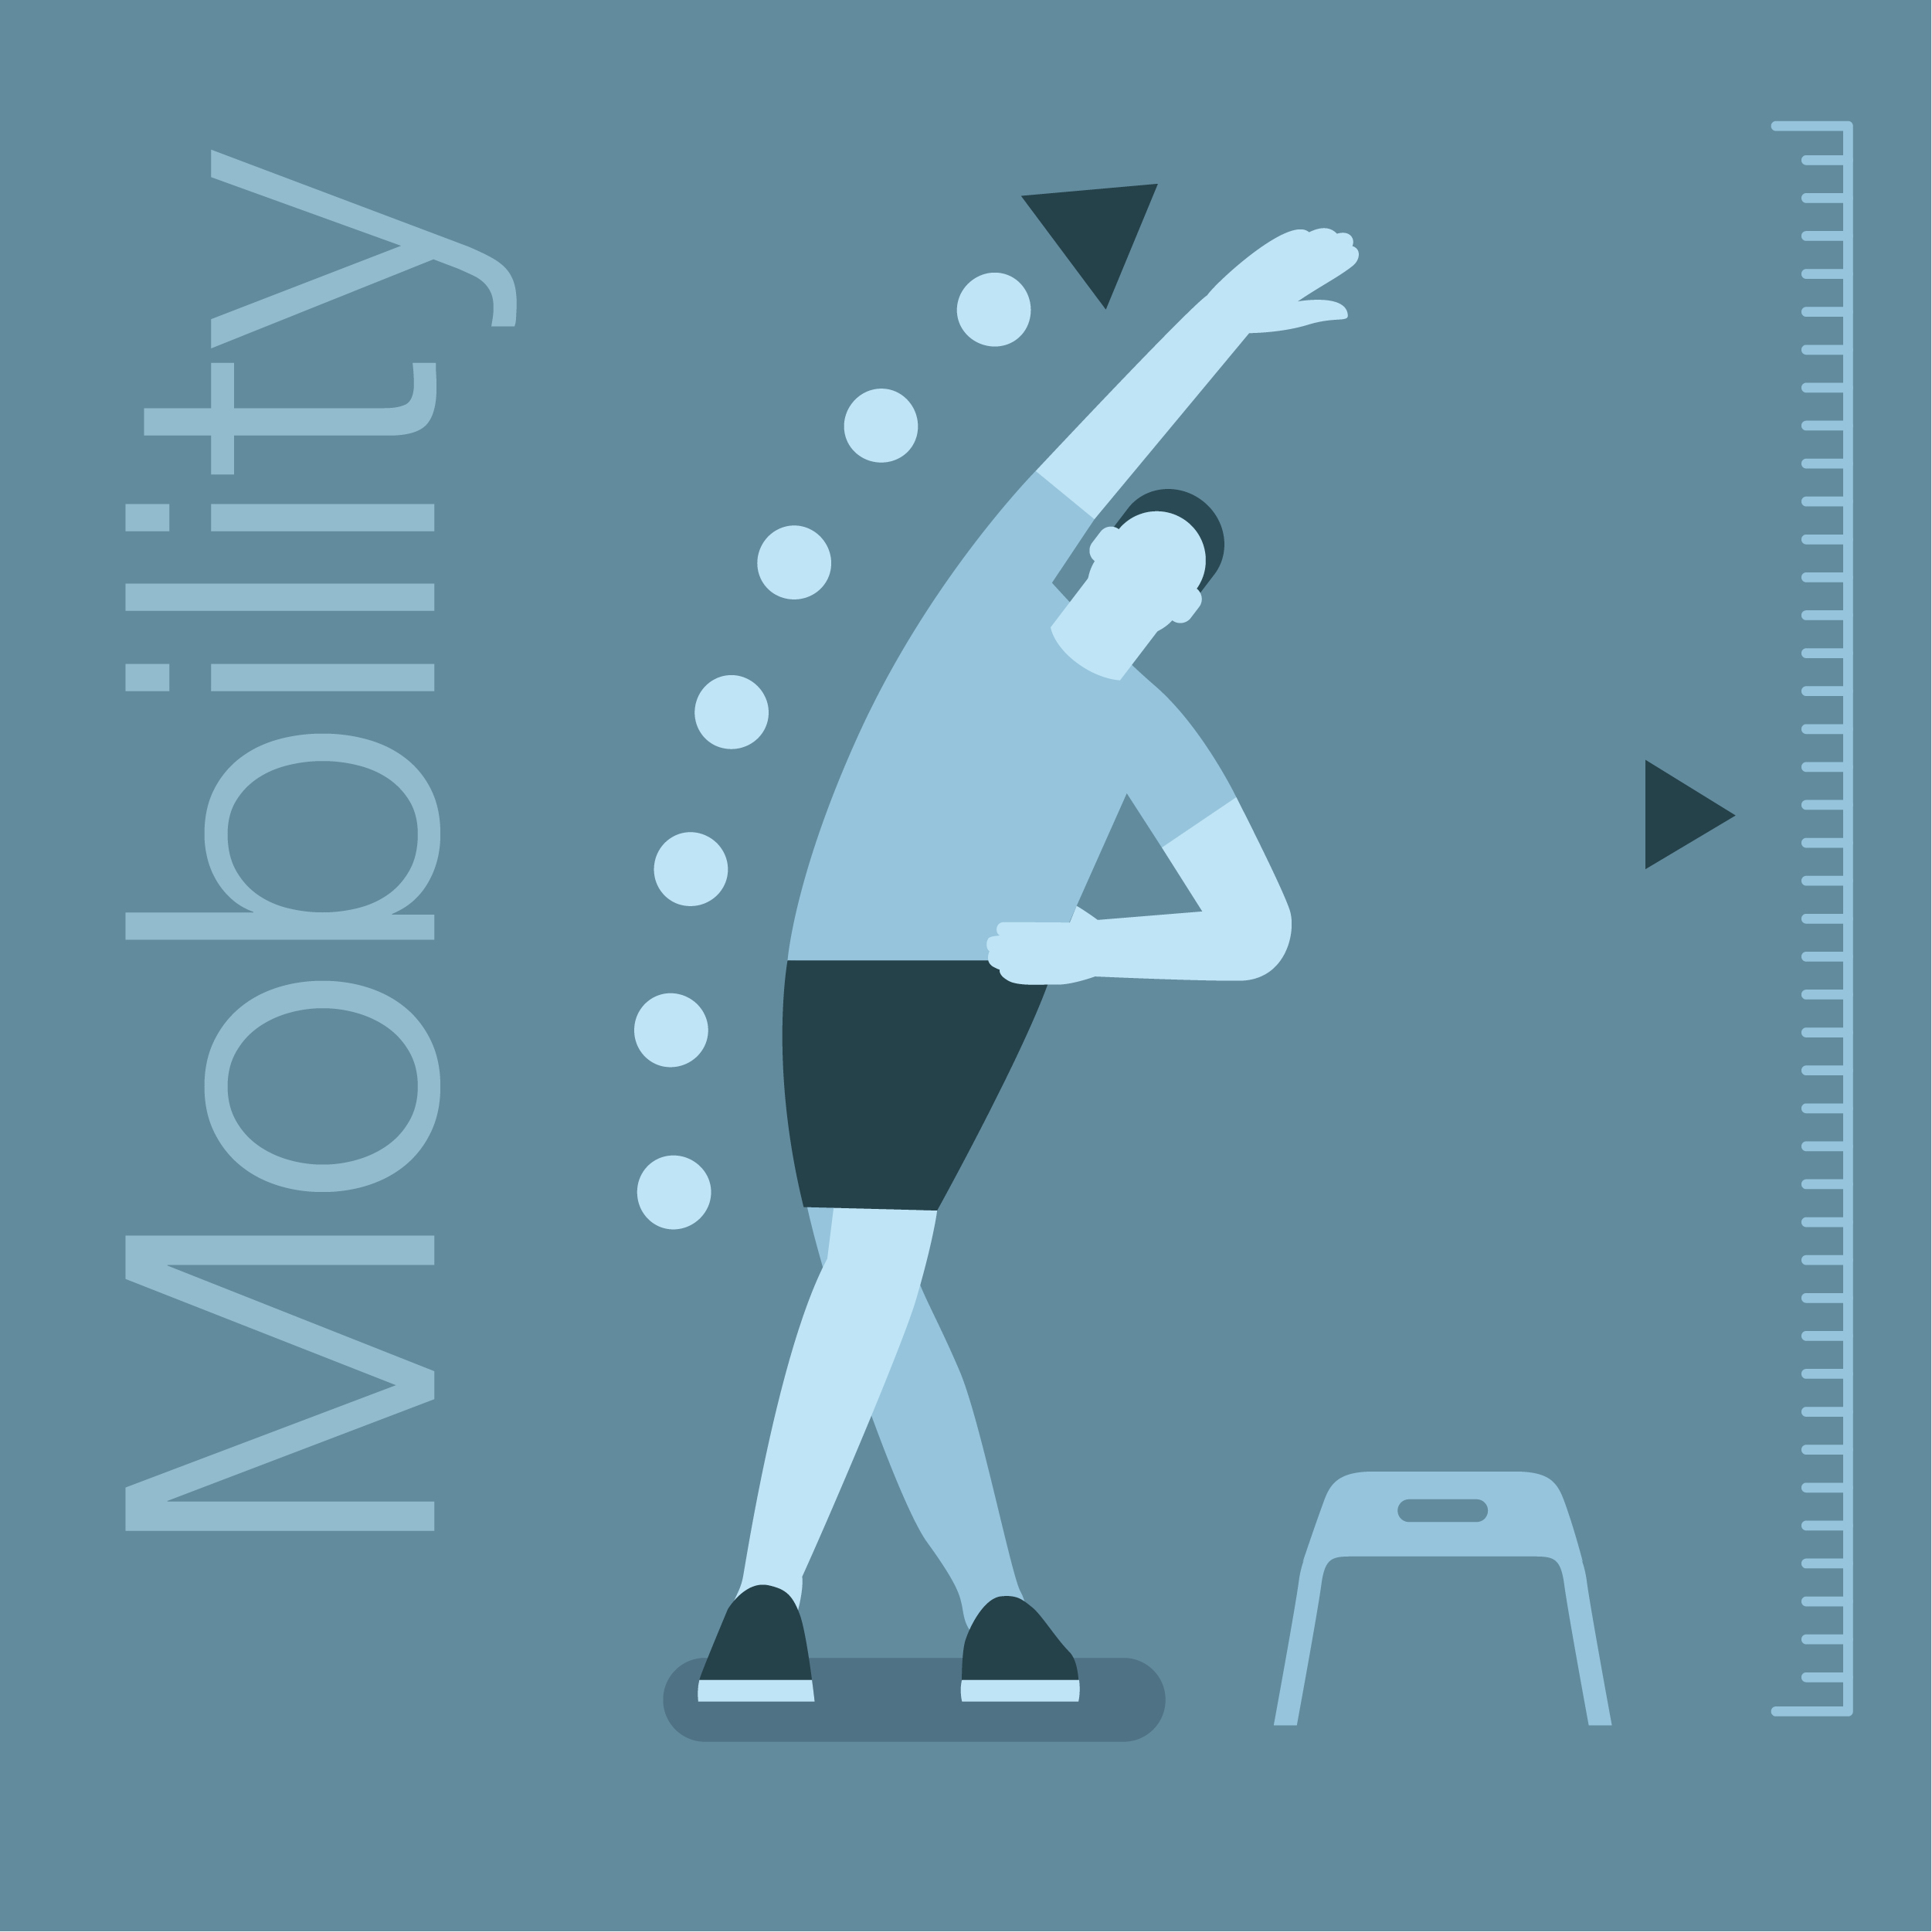 Experience Life's December fitness program illustration: Mobility Day